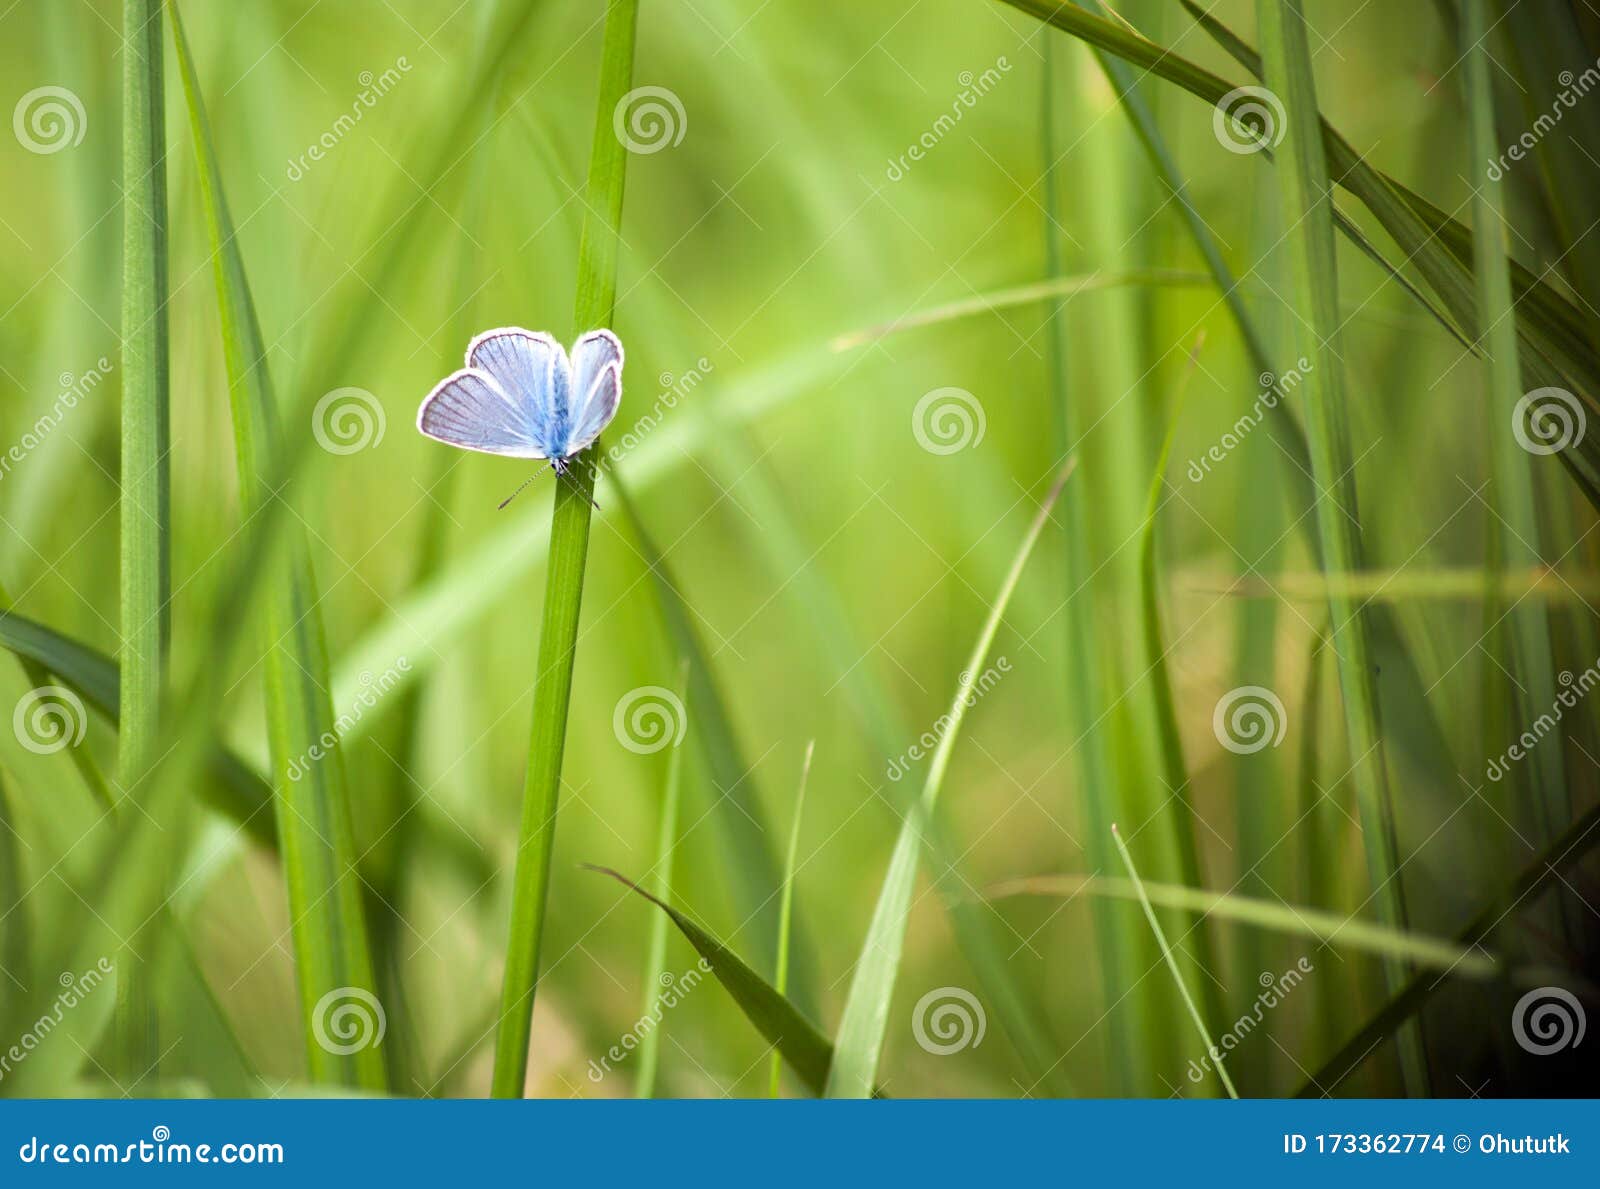 blue butterfly - cupido minimus on a green grass. blue butterfly on blurred background. summer time wallpaper